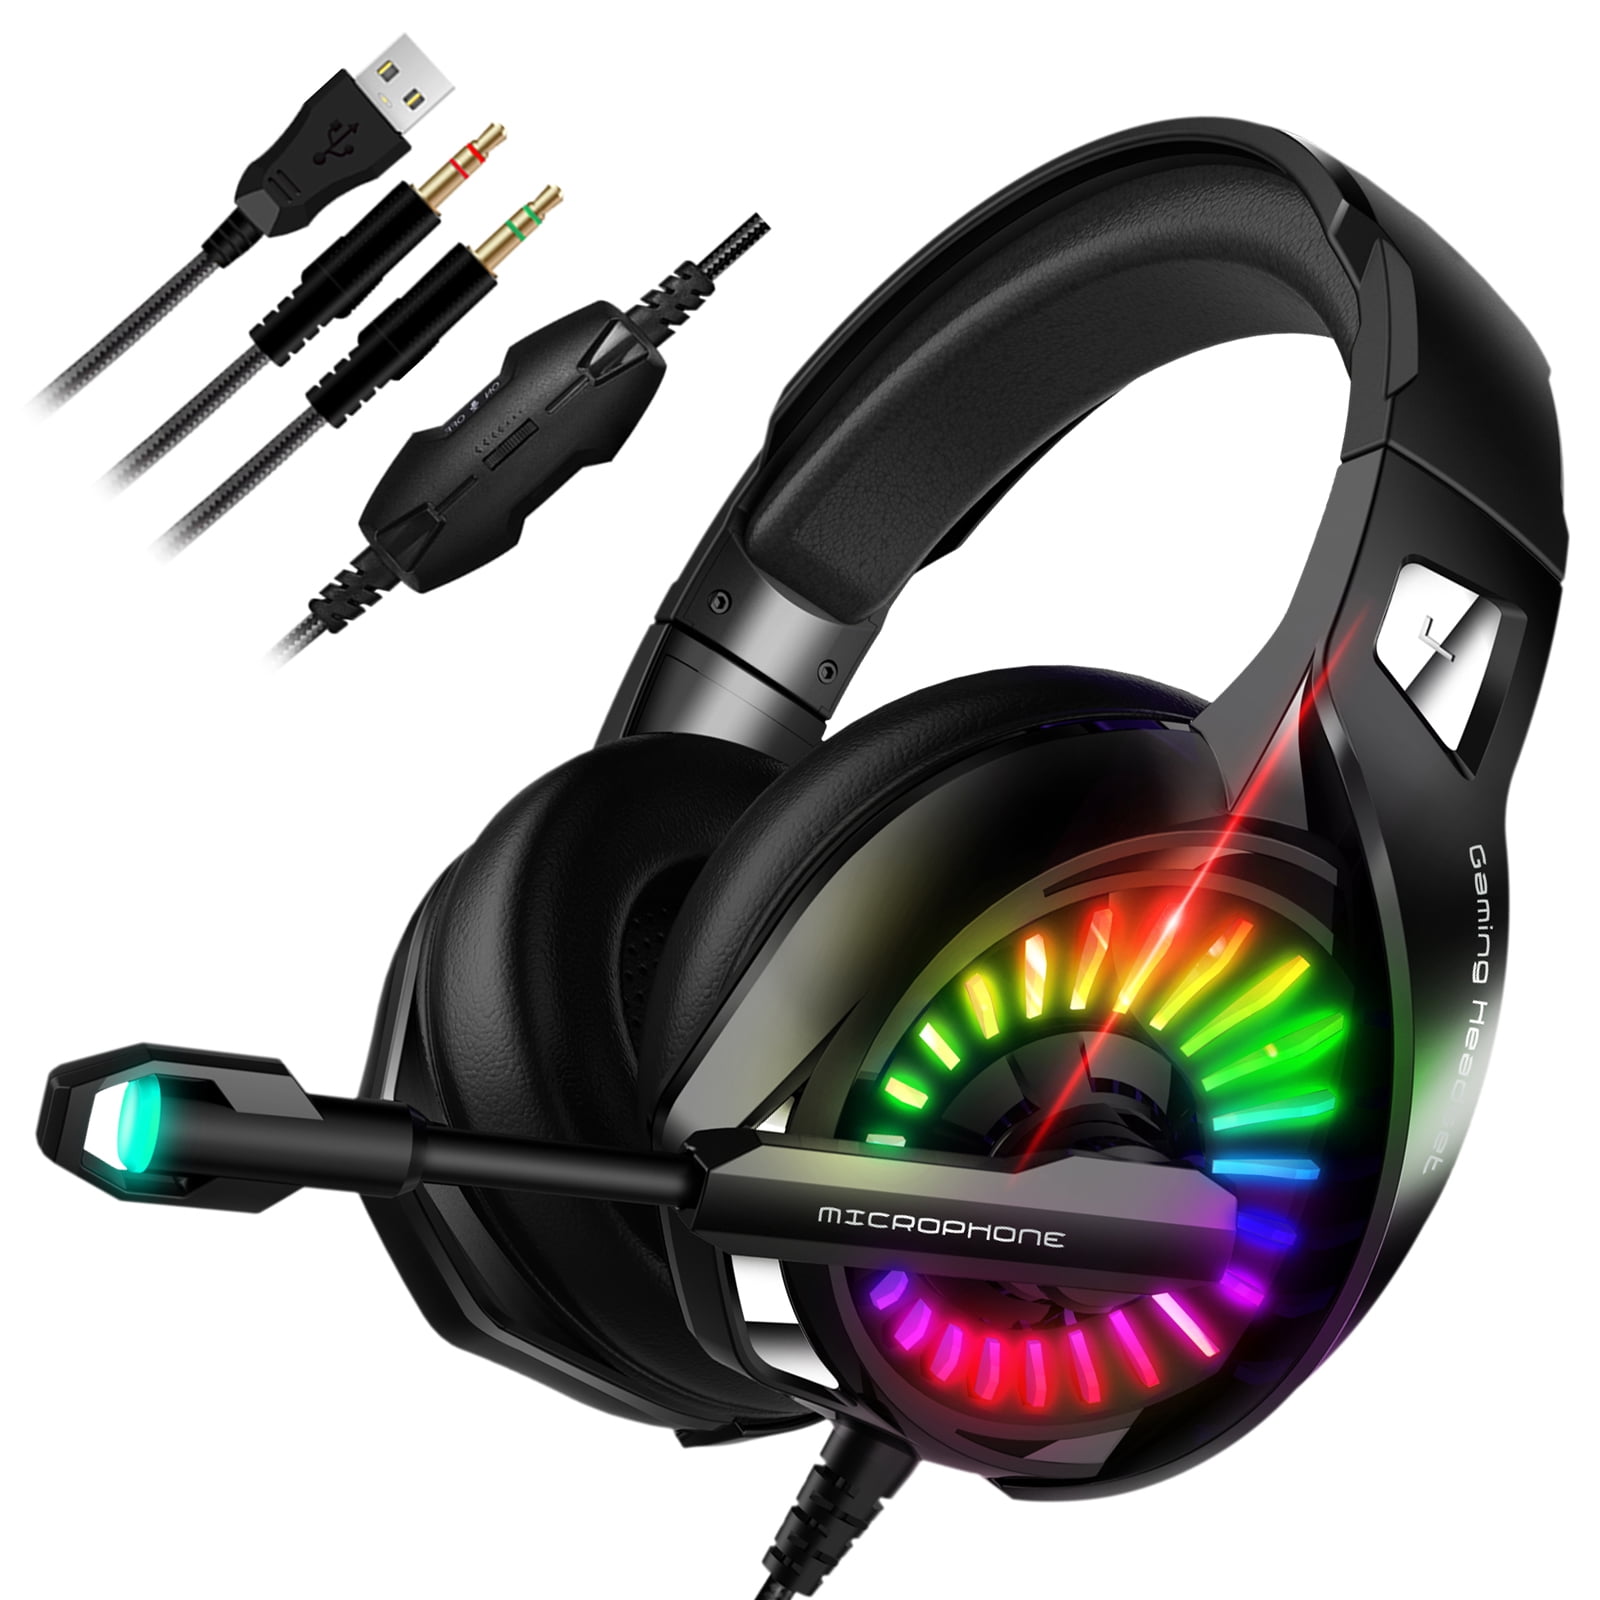 Opknappen Vooruitzien astronomie TSV Gaming Headset for PC, PS4, Xbox One - 7.1 Surround Sound Headphones  Over-Ear with Noise Canceling Microphone, RGB Backlit Lights, Memory  Earmuffs, 3.5mm Wired Headset for PC, Laptop, Mobile, Mac -